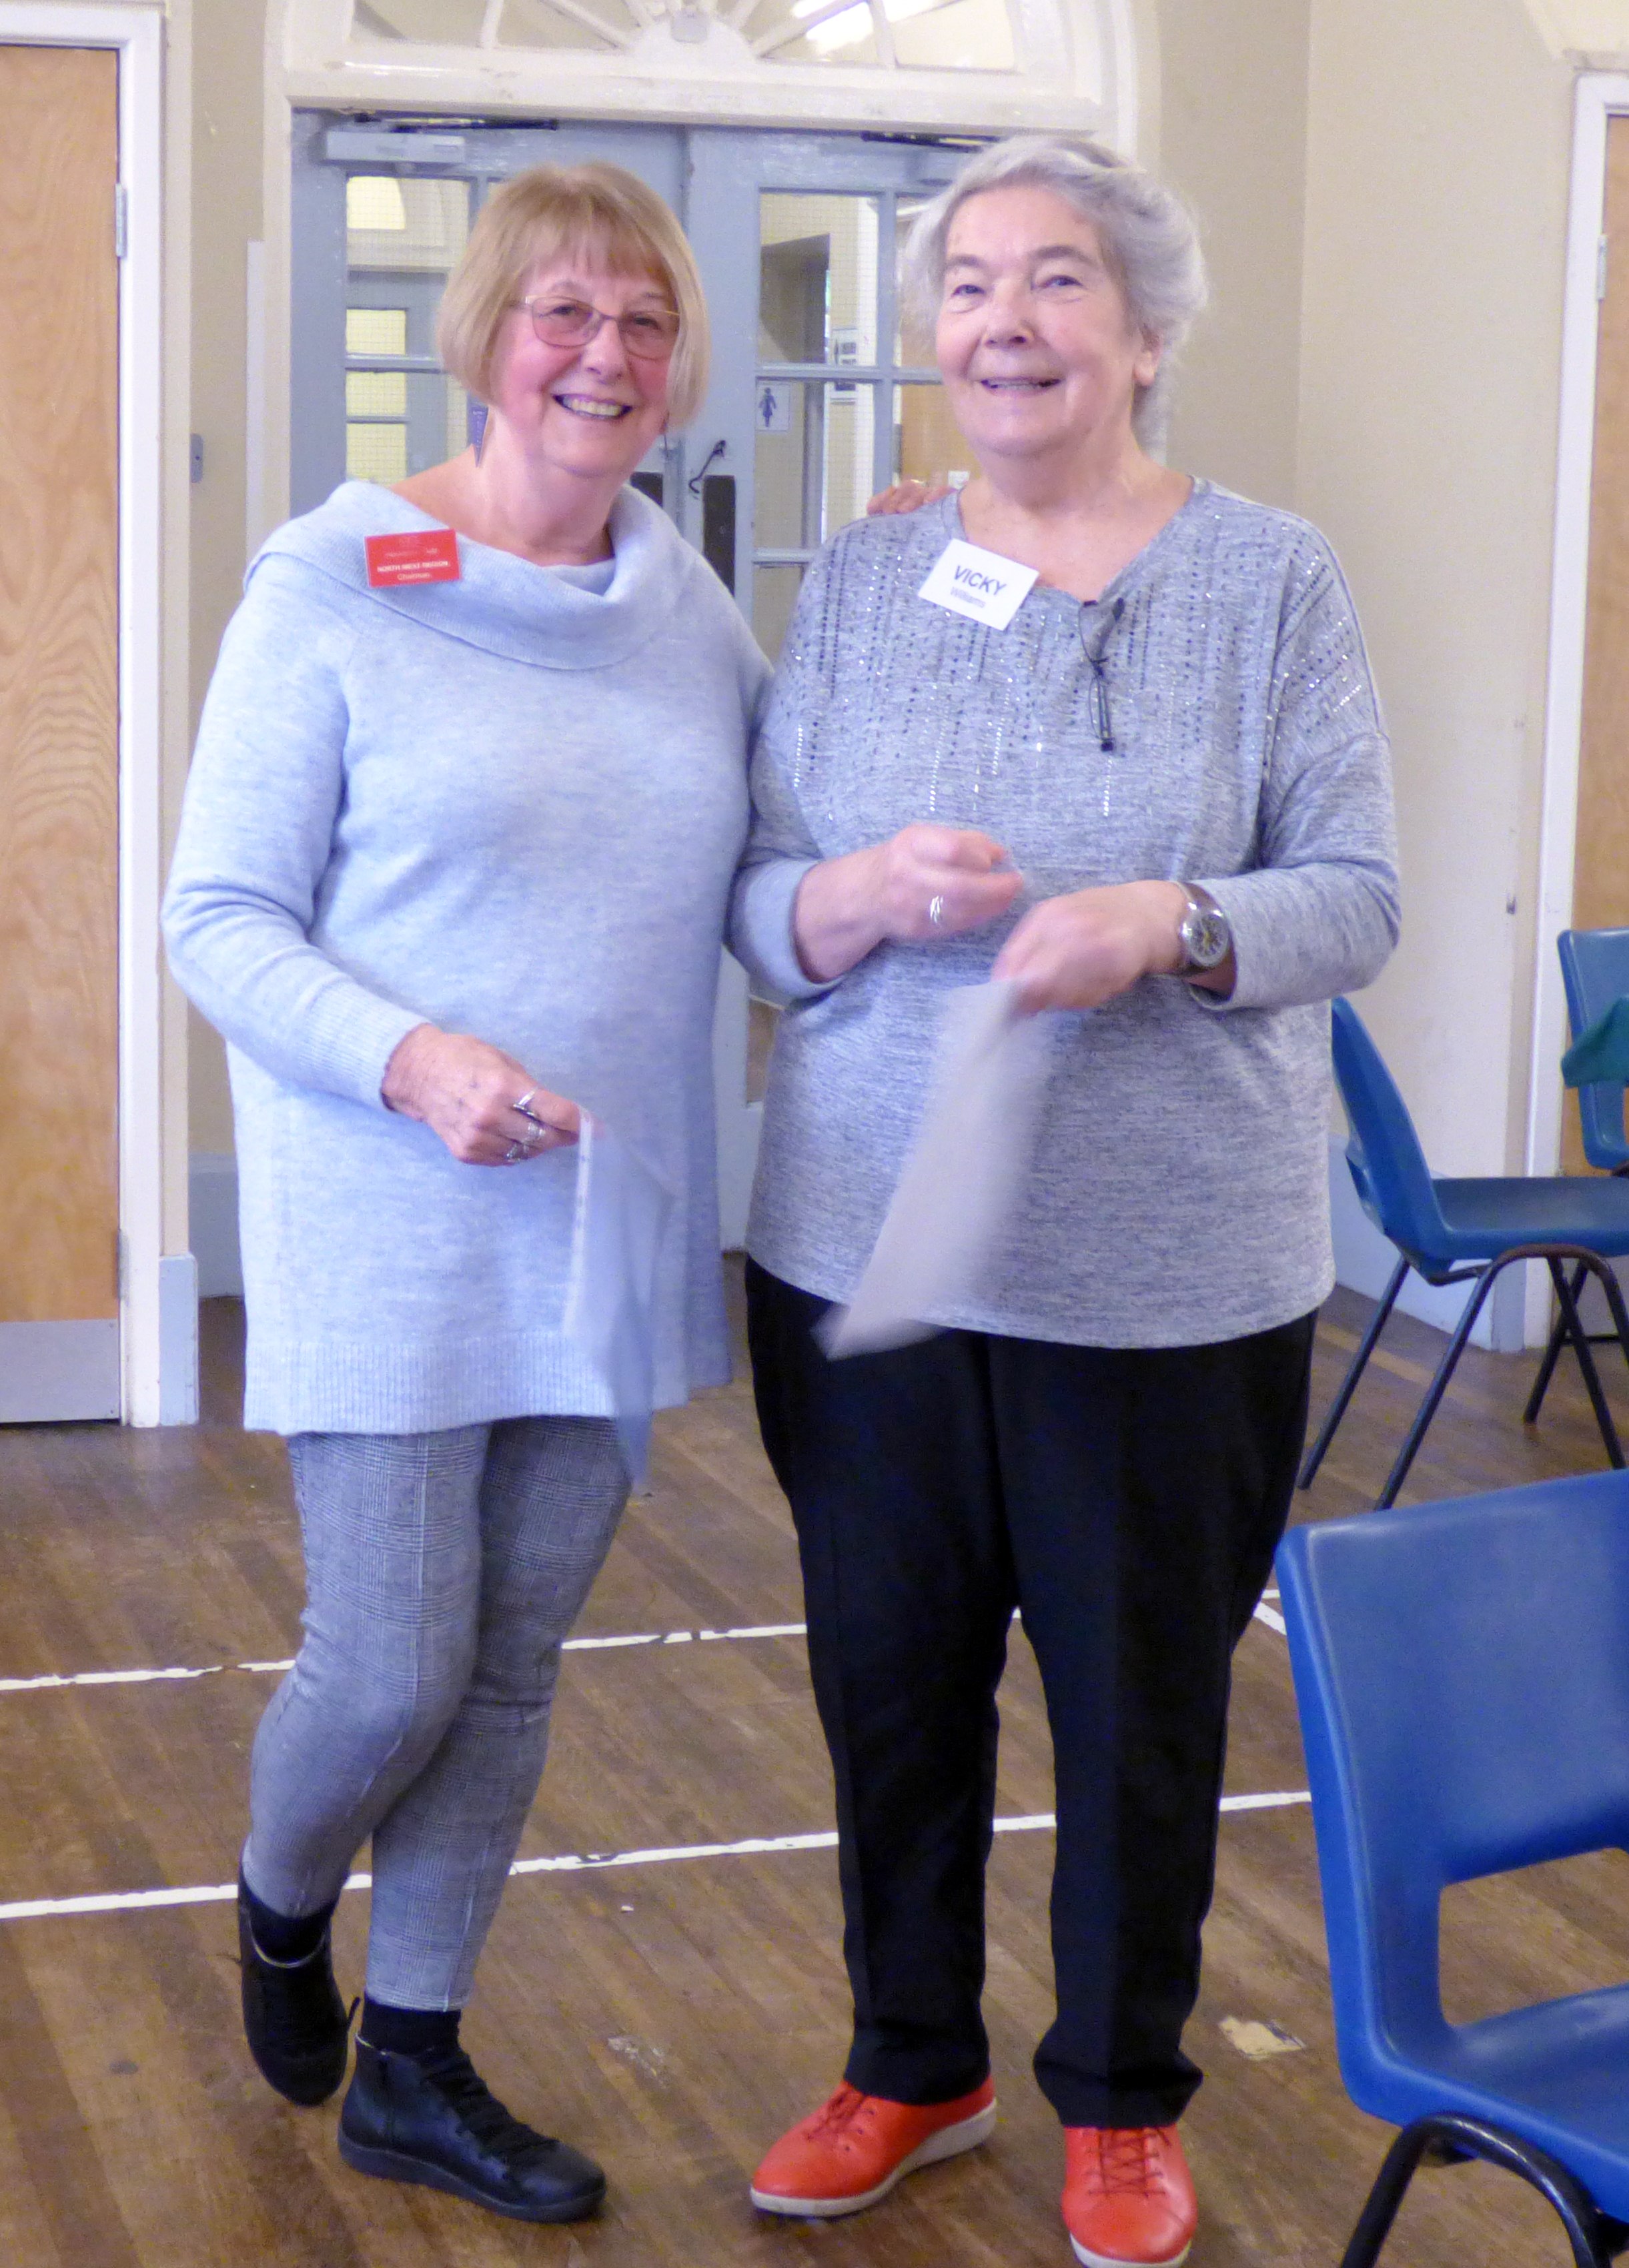 NW Regional Chair Sue Chisnall presented Vicky Williams with her 25 year badge and certificate at MEG Christmas Party 2019